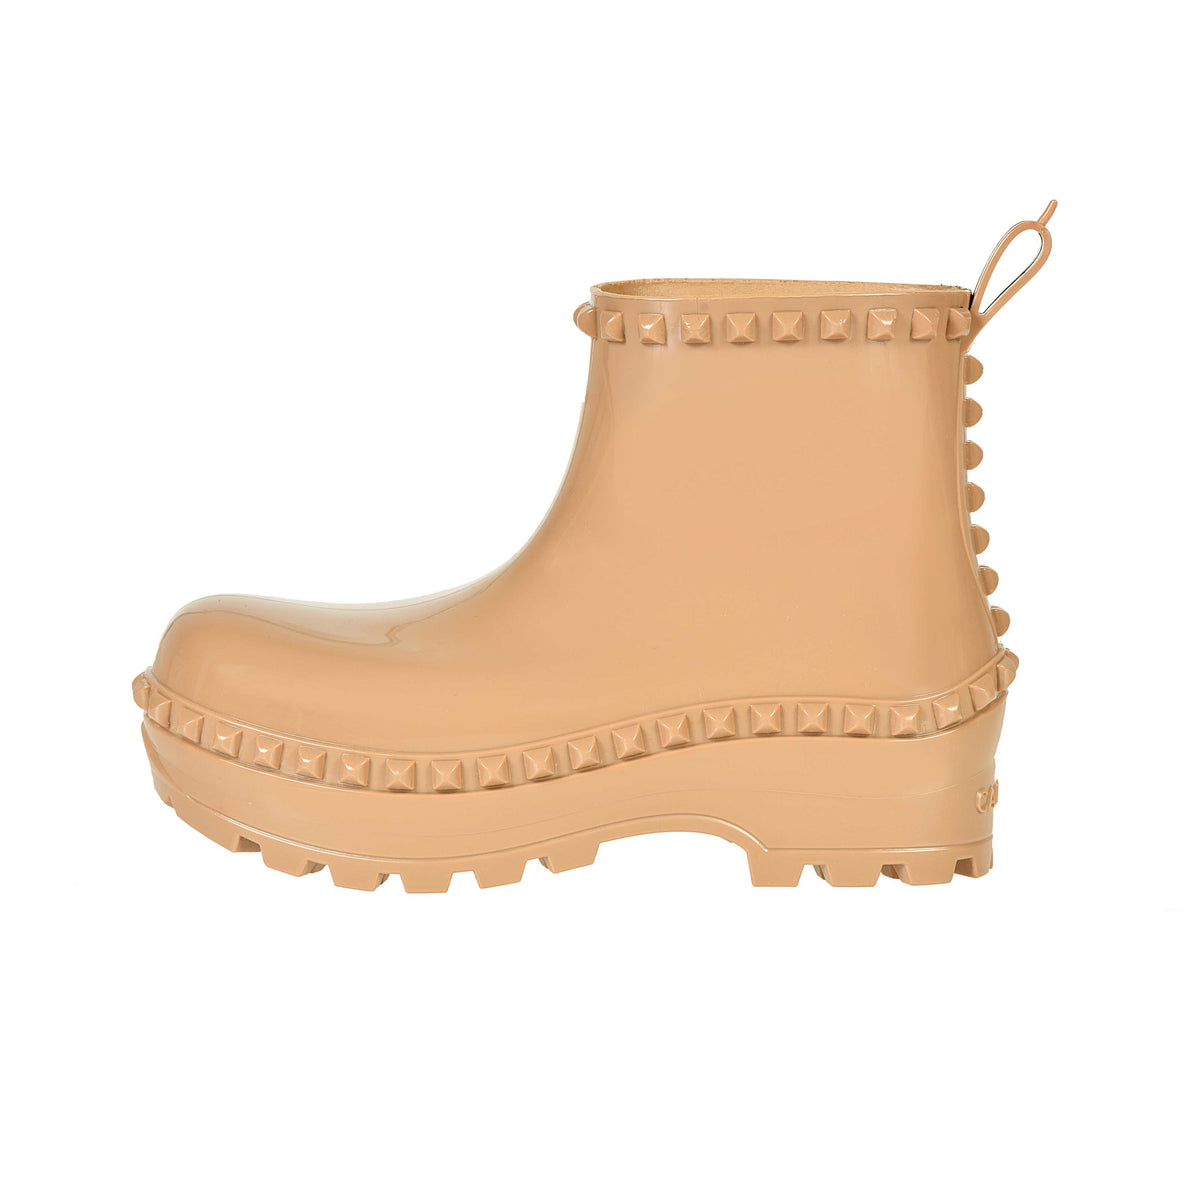 Nude jelly Bottega boots from Carmen Sol